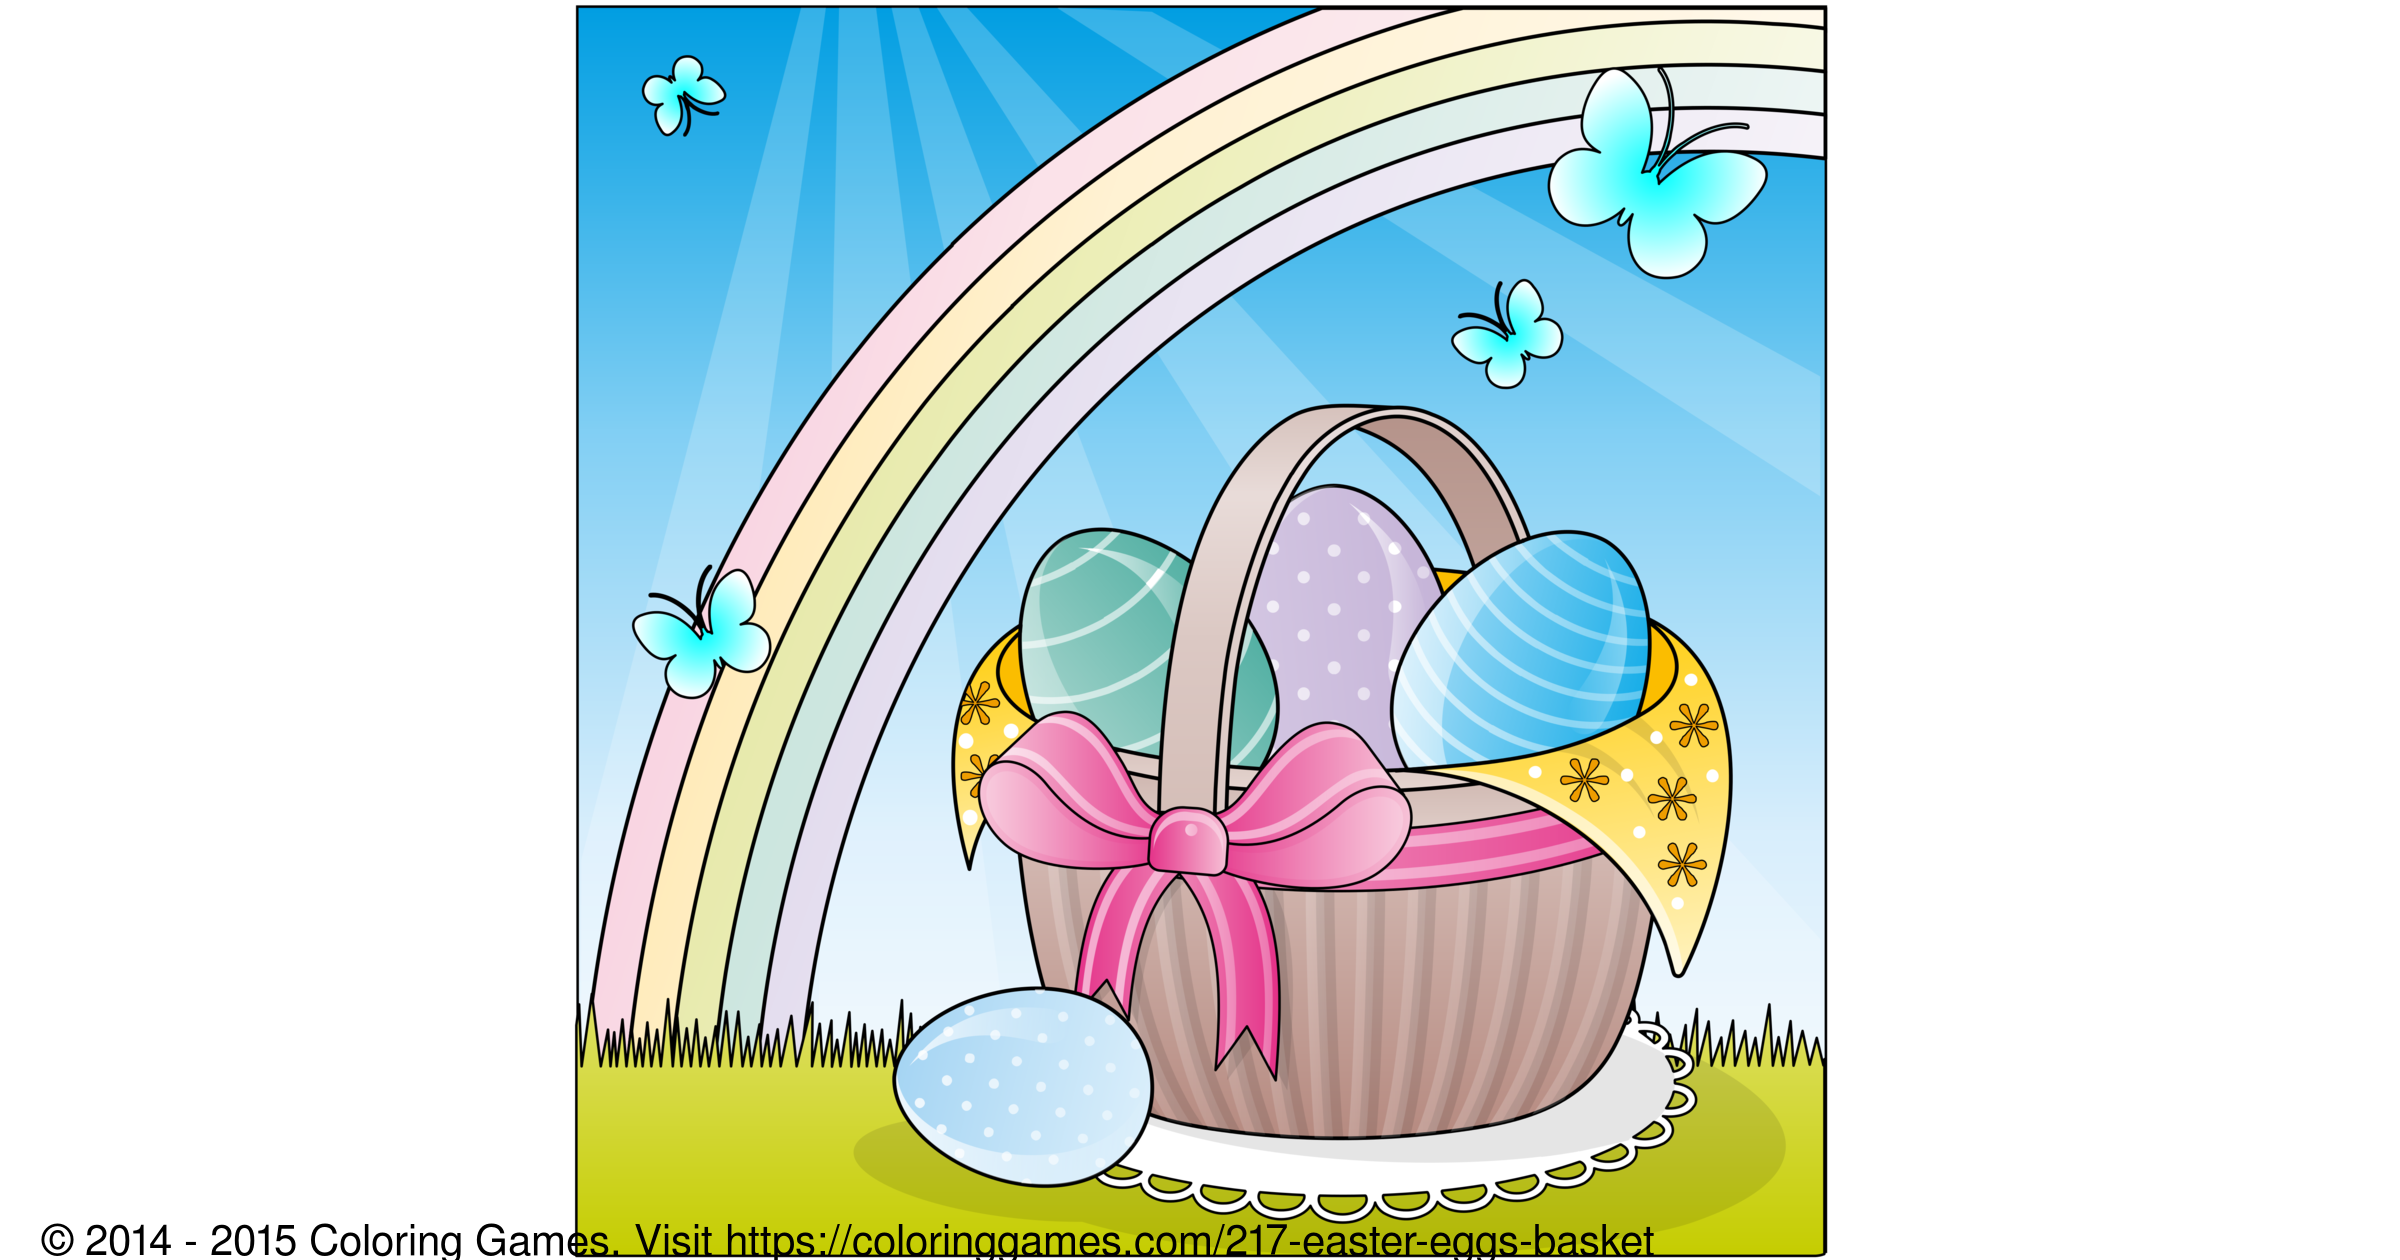 Easter eggs basket - Coloring Games and Coloring Pages